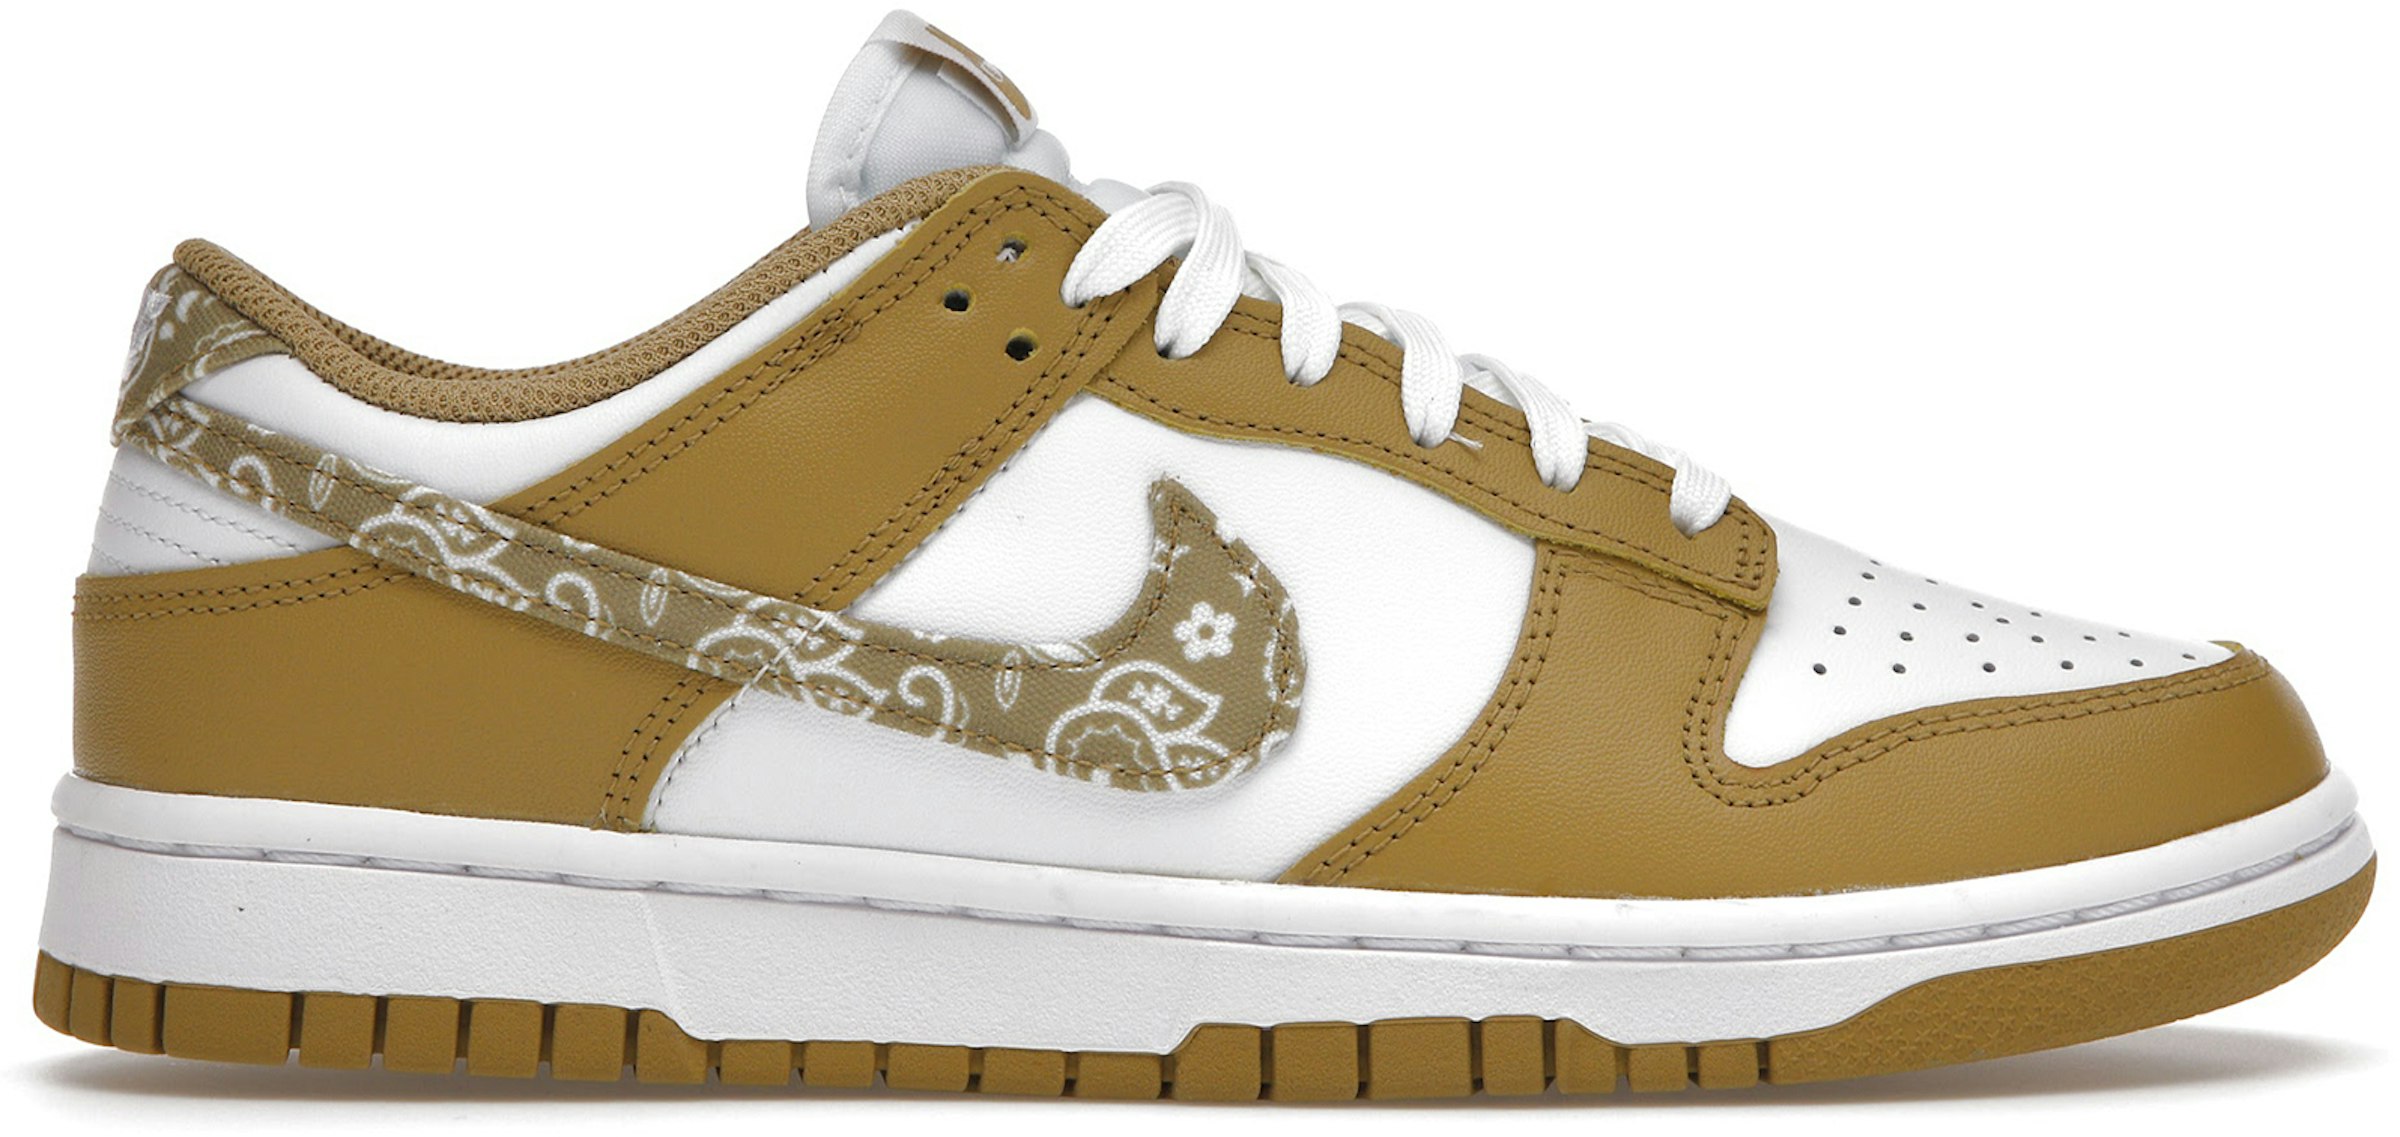 Nike Dunk Low Paisley Pack Barley (Women's) - DH4401-104 US